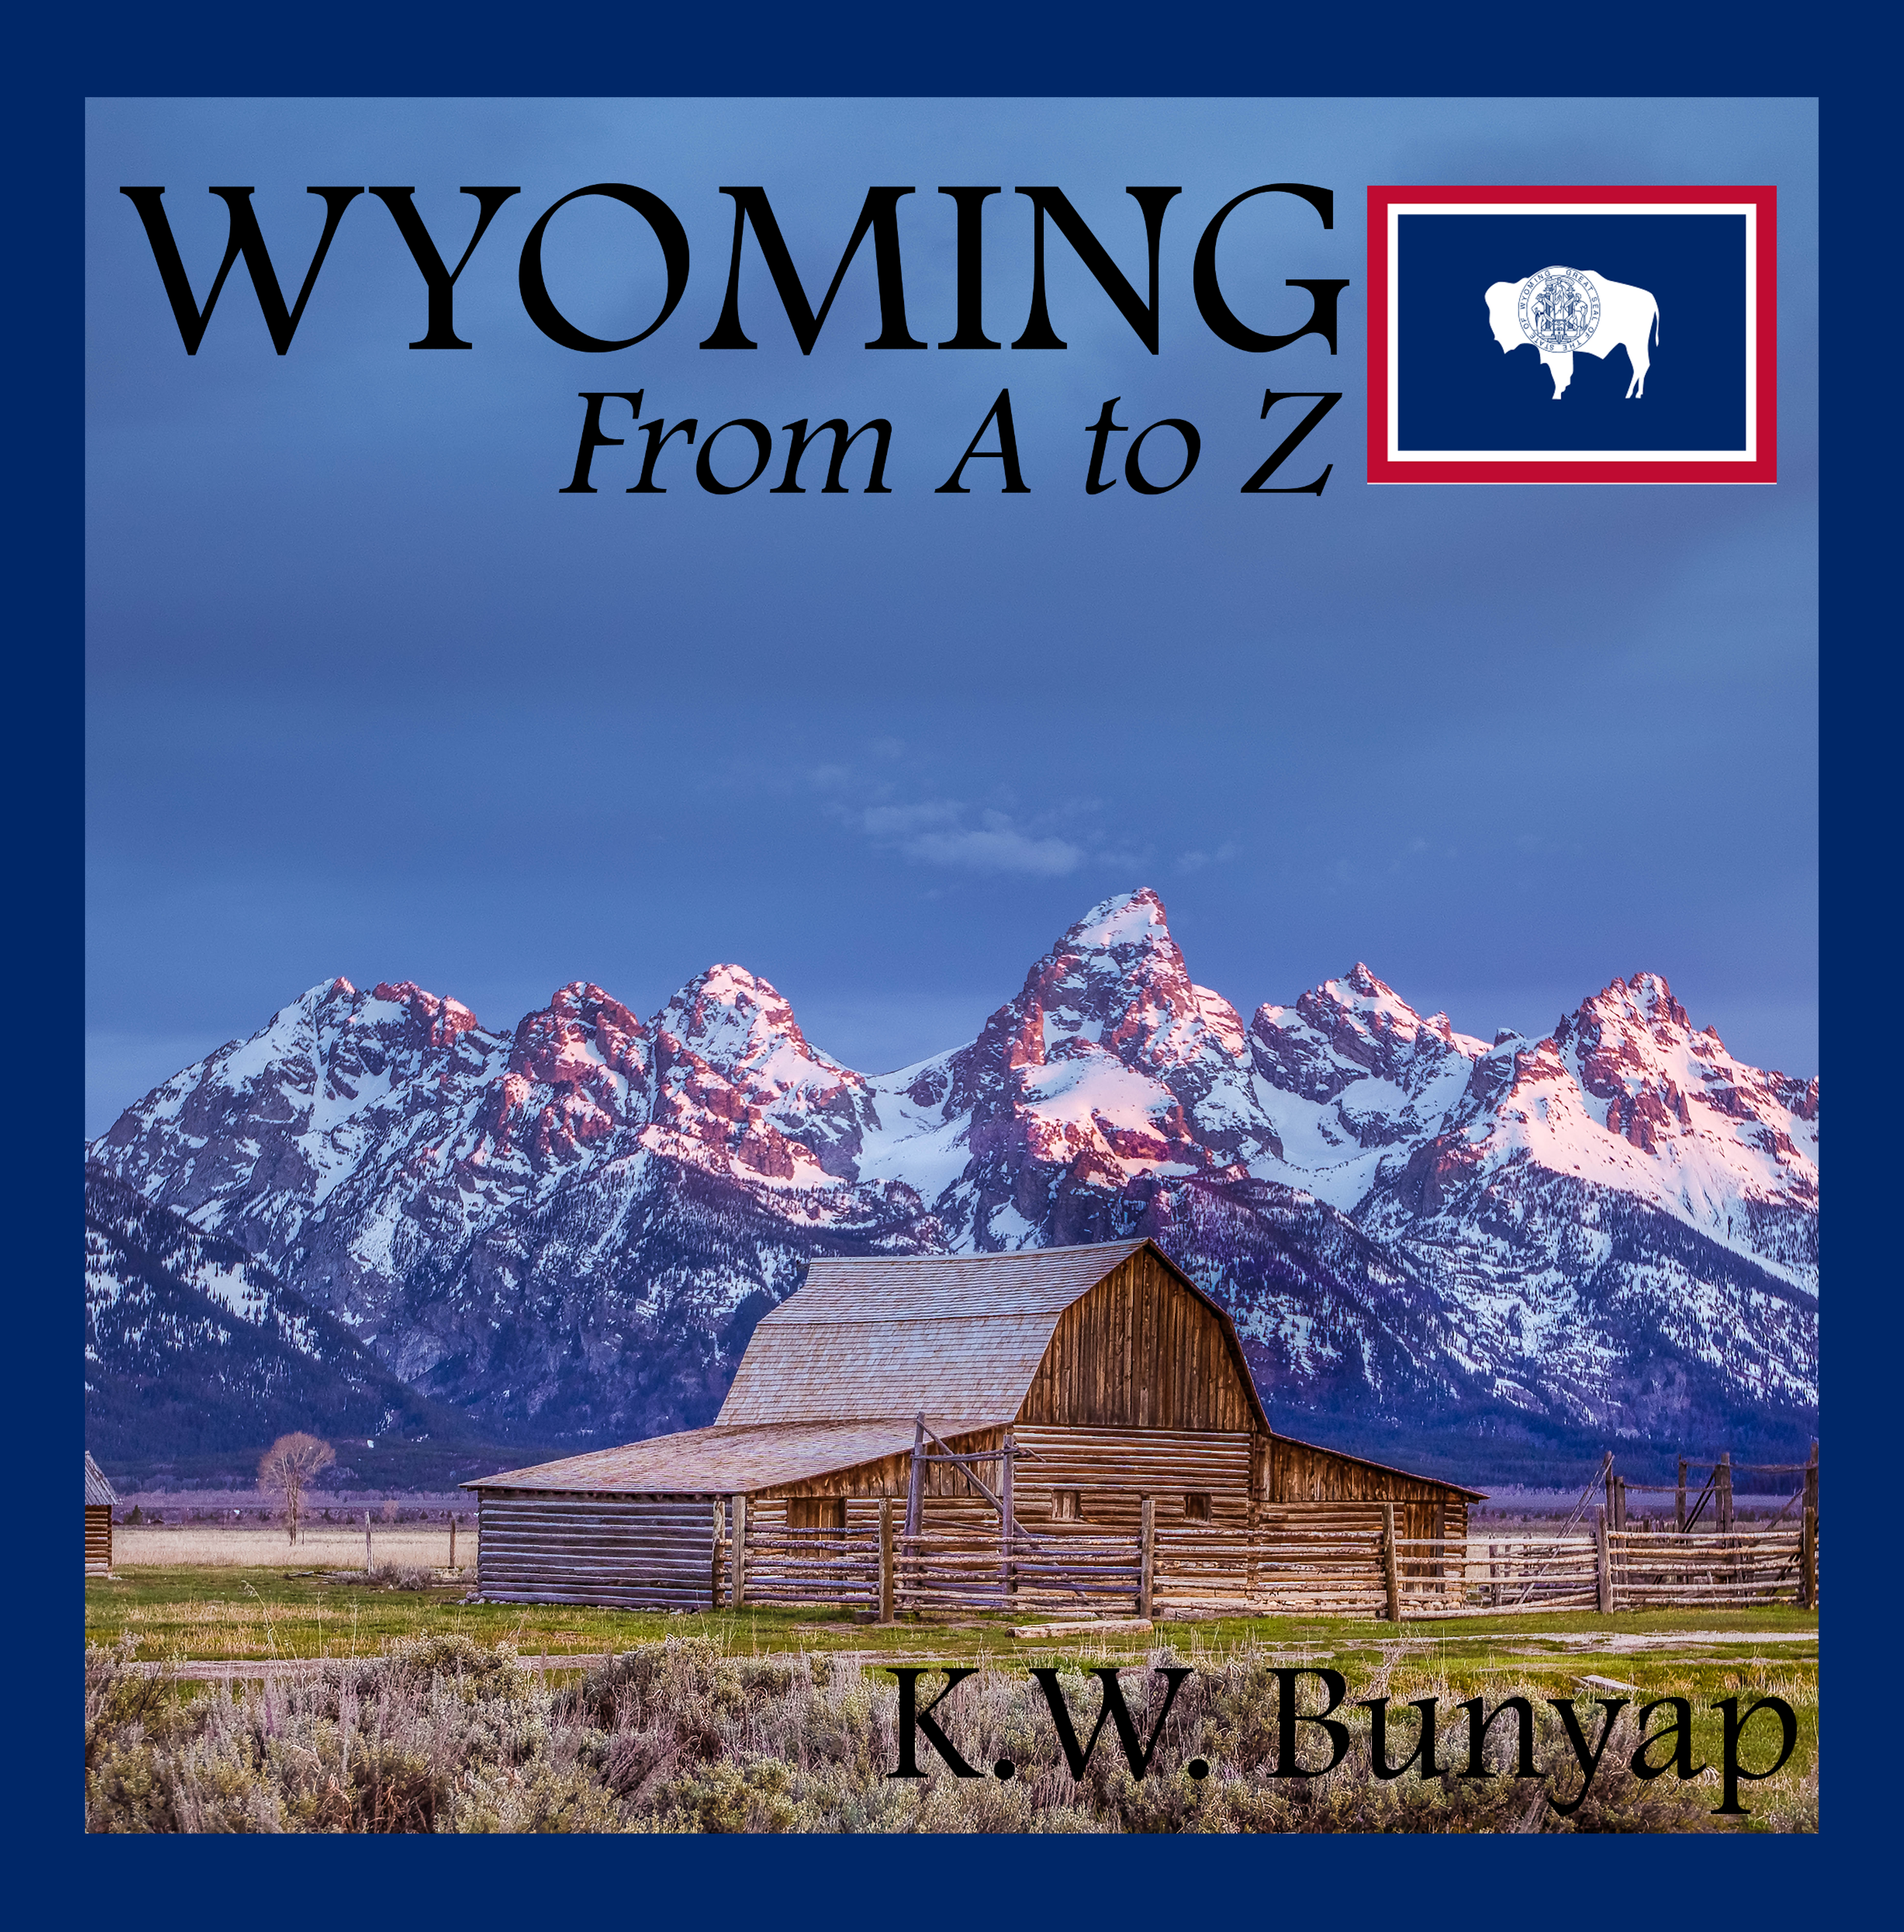 01_Wyoming from A to Z